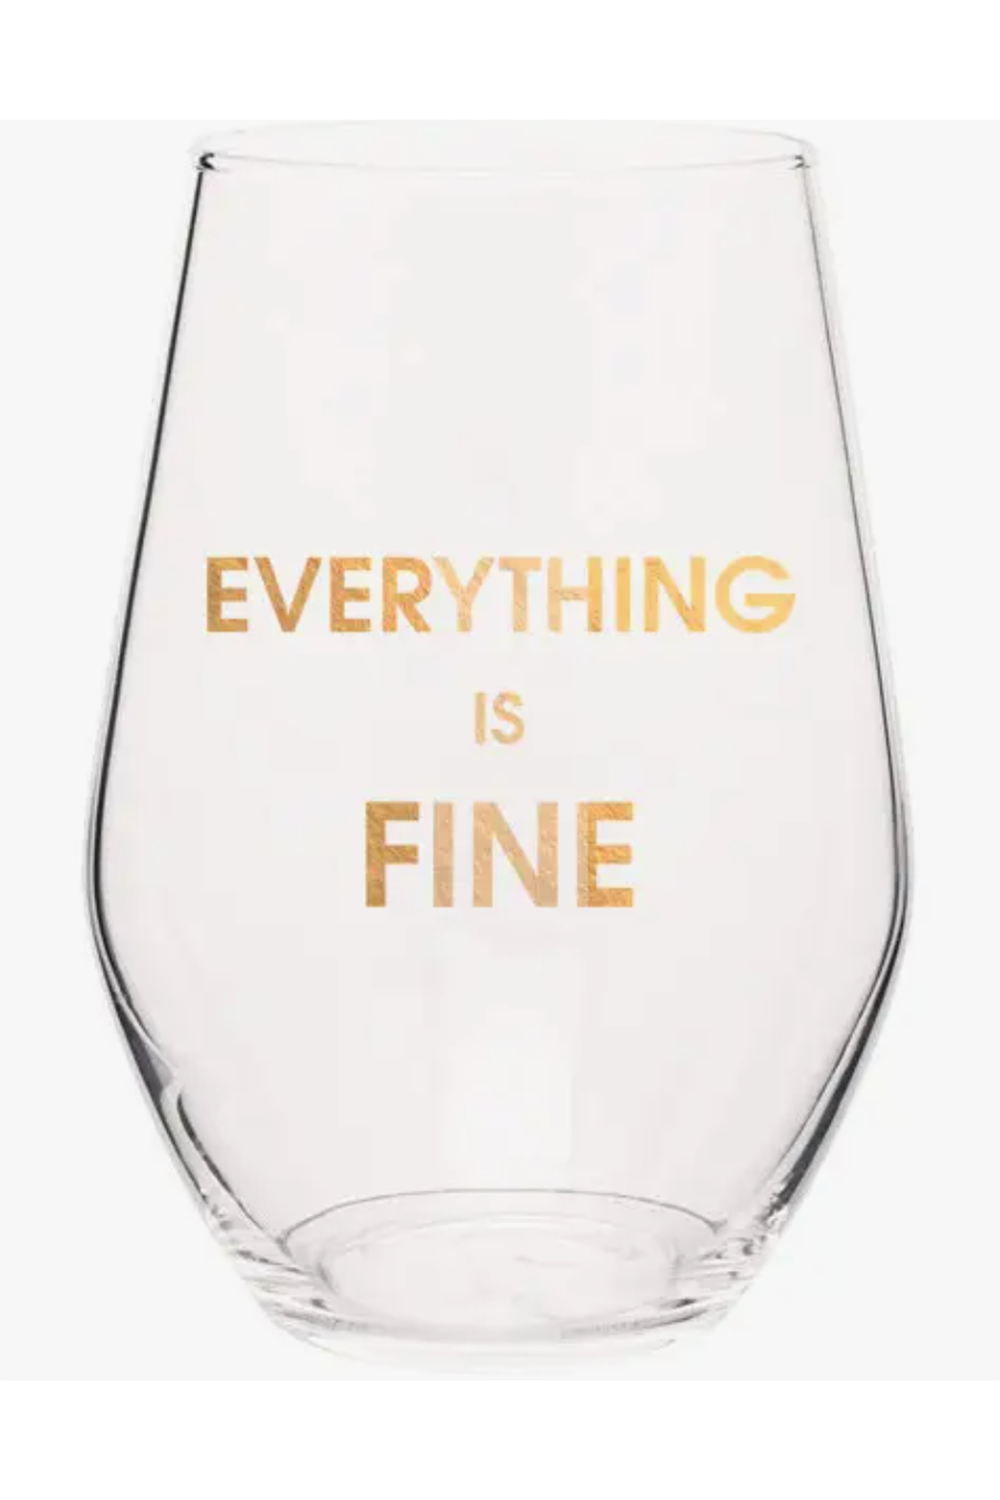 Gold Foil Wine Glass - Everything is Fine